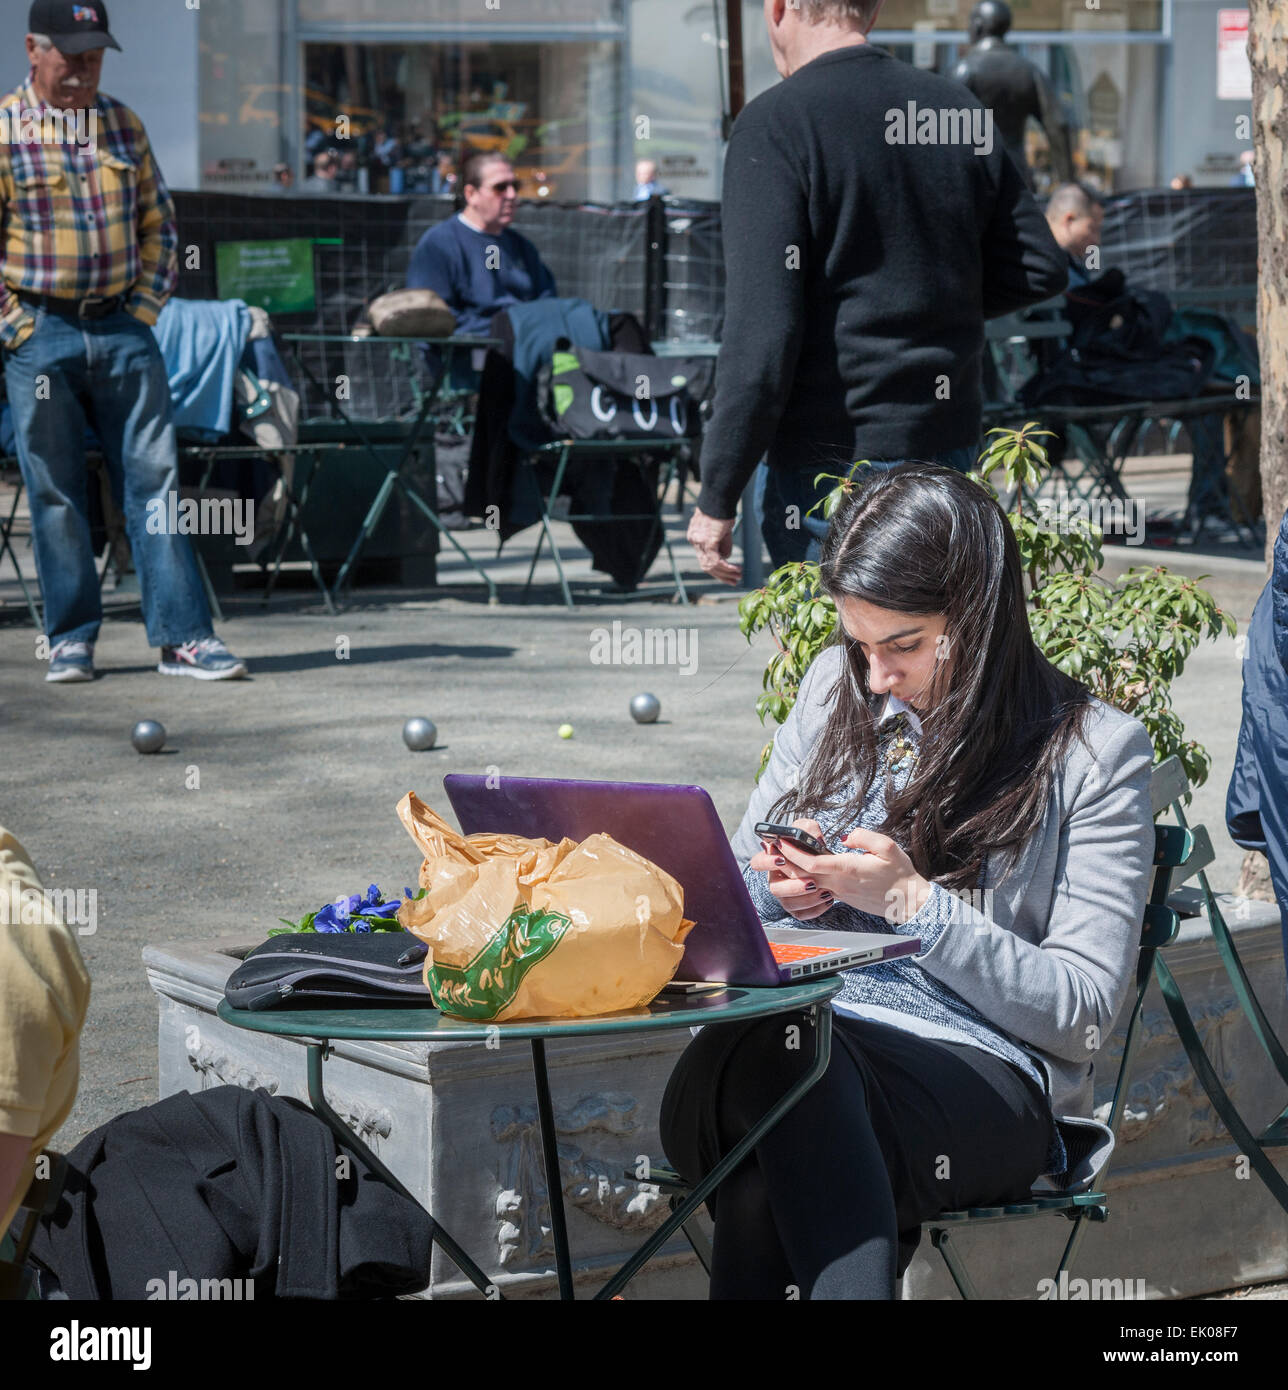 A woman with her smartphone and laptop, joining other park goers shedding the winter blues in Bryant Park in New York on Thursday, April 2, 2015. Warm weather in the mid 60's attracted office workers and tourists to the outdoors. (© Richard B. Levine) Stock Photo